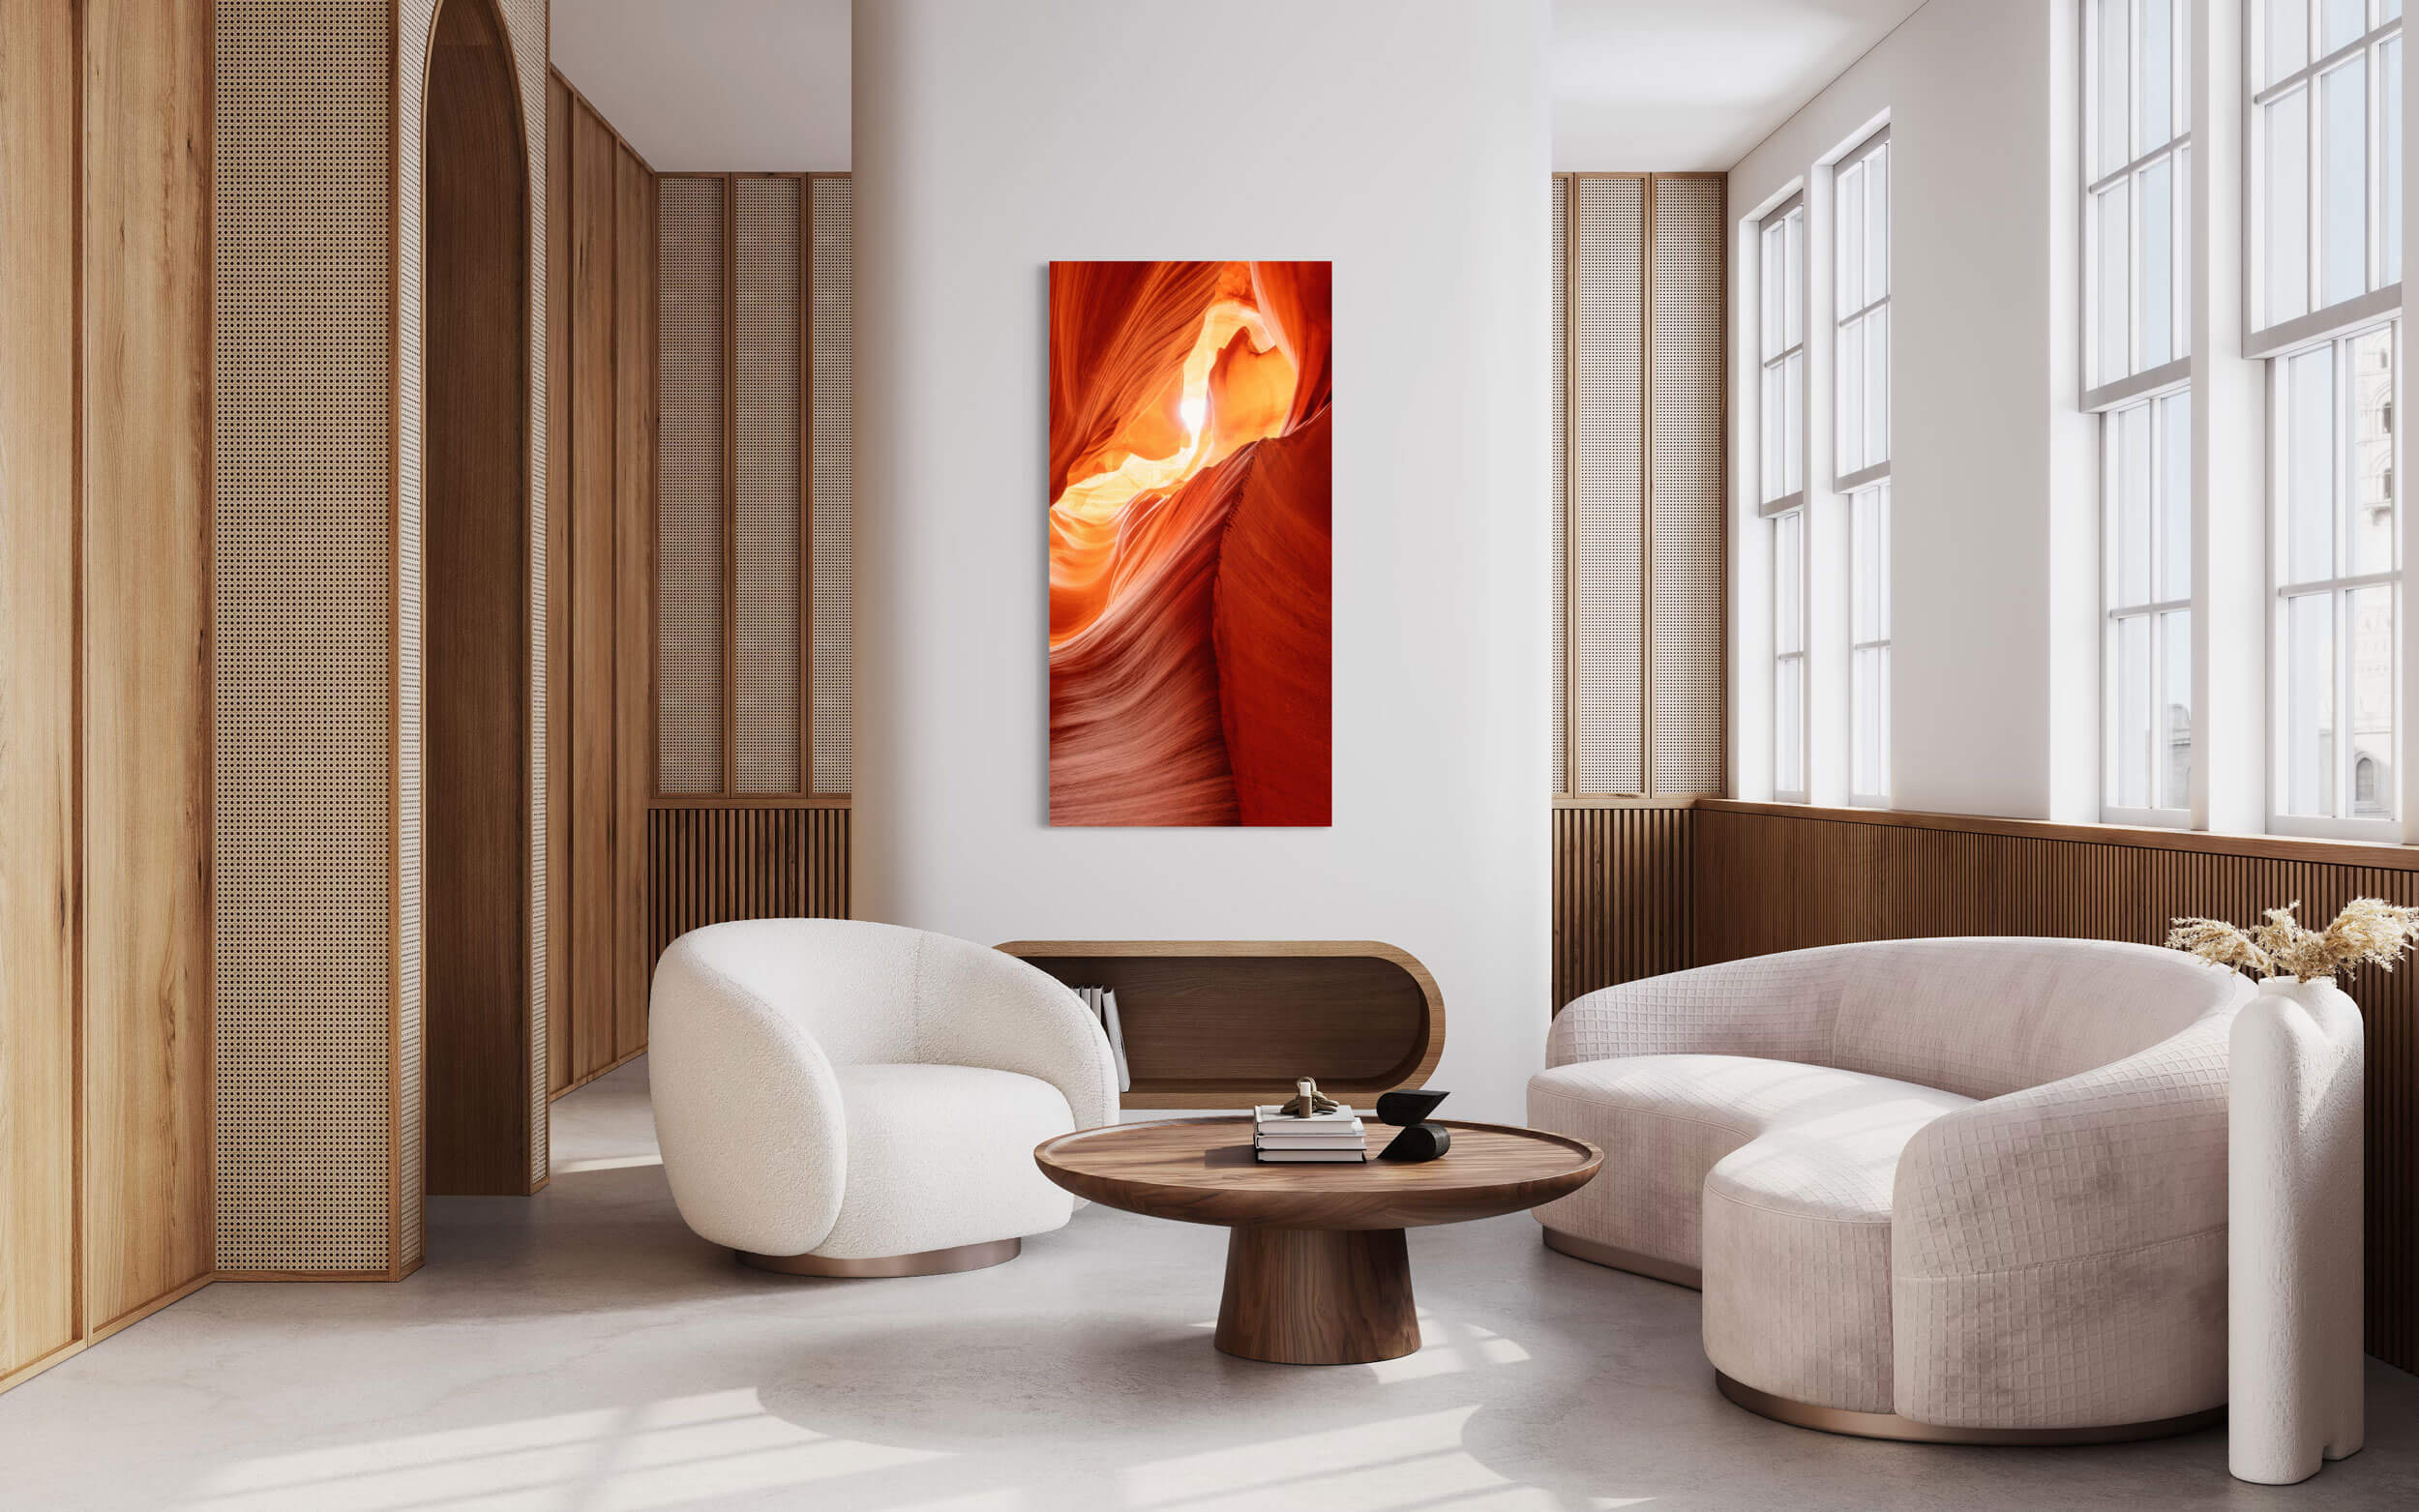 A picture of Antelope Canyon hangs in a living room.